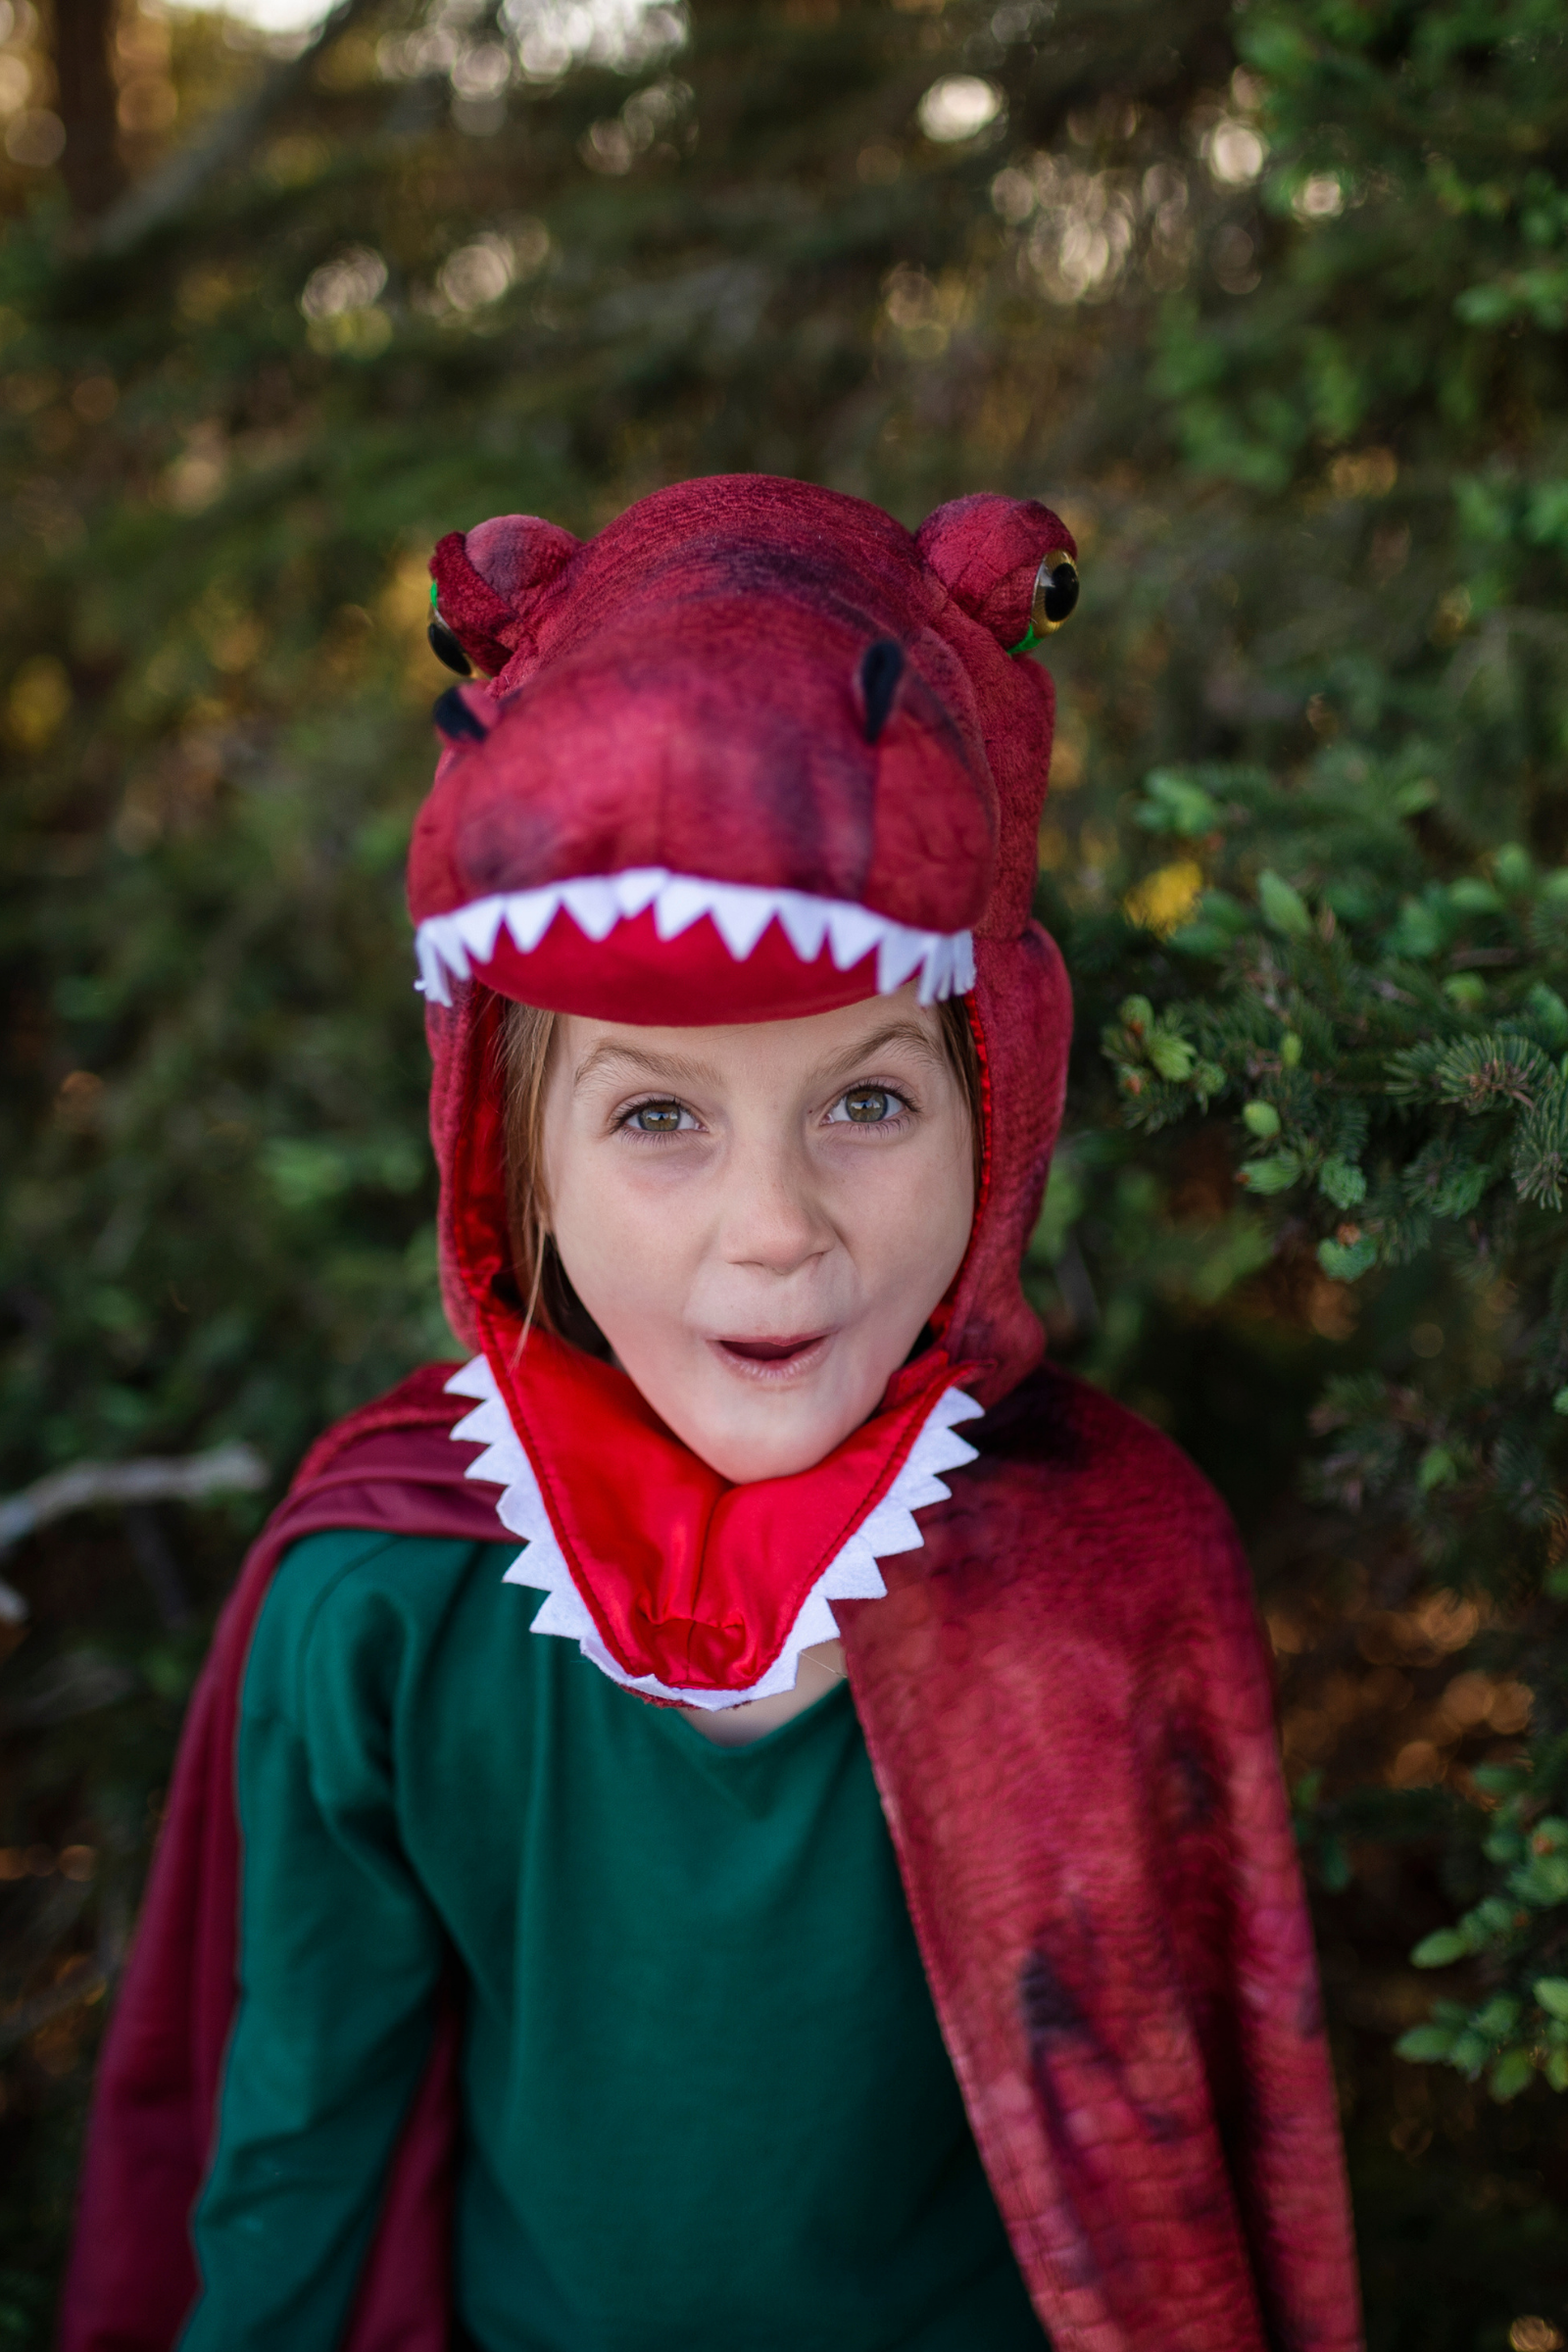 Red & Black Grandasaurus T-Rex Cape with Claws